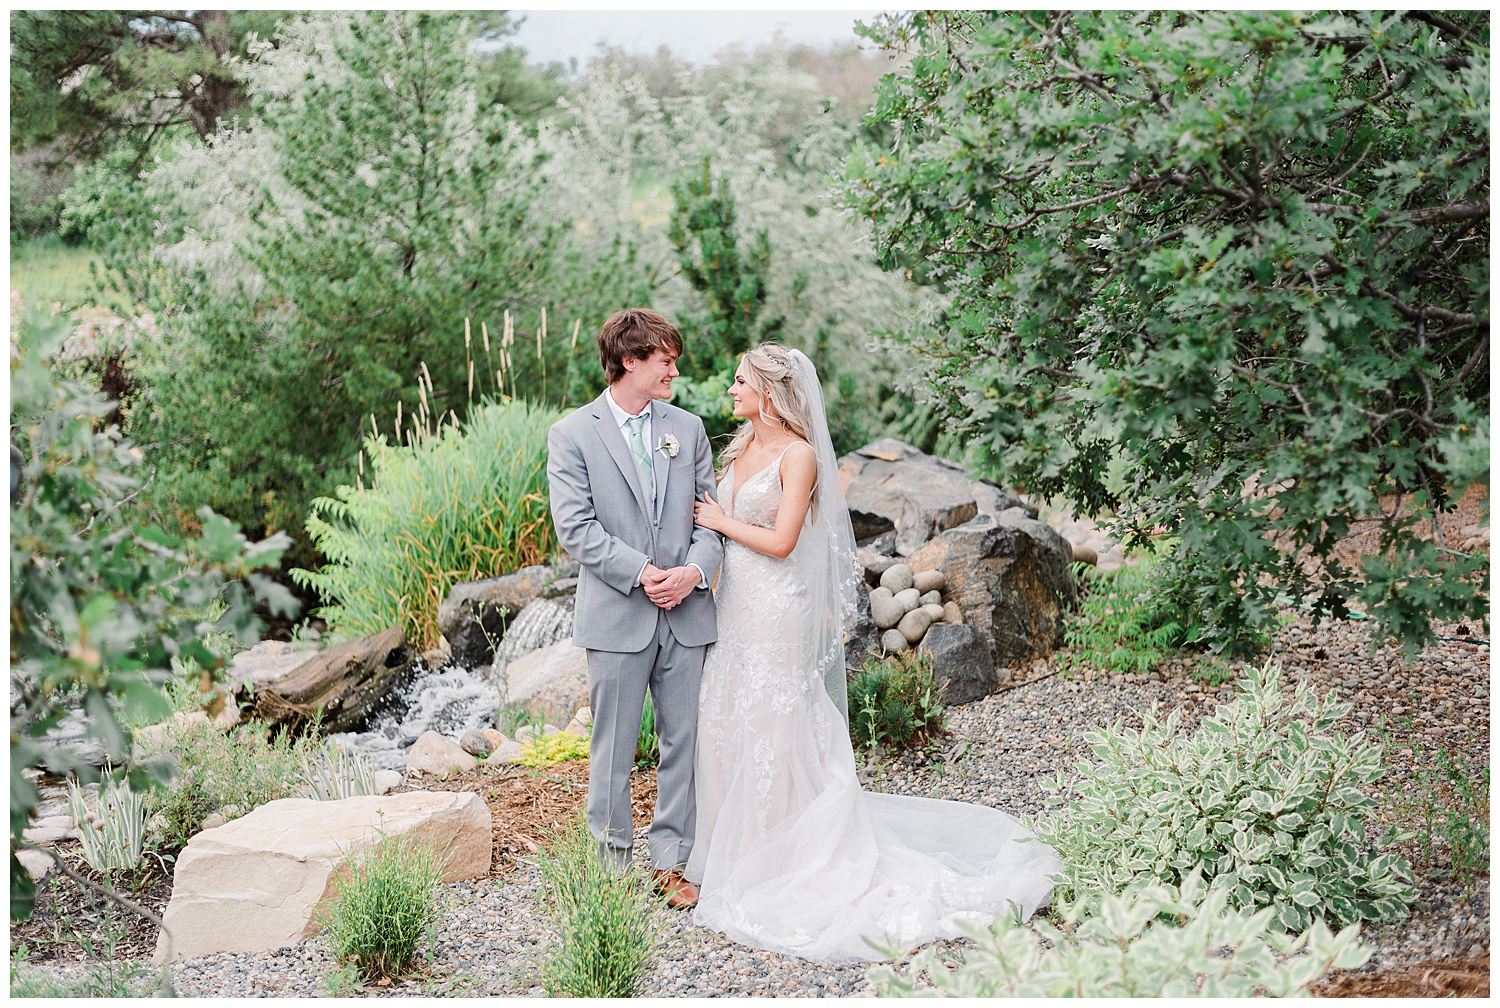 Surrounded by greenery and a waterfall in the background, a bride and groom hold hands while looking at each other and smiling.